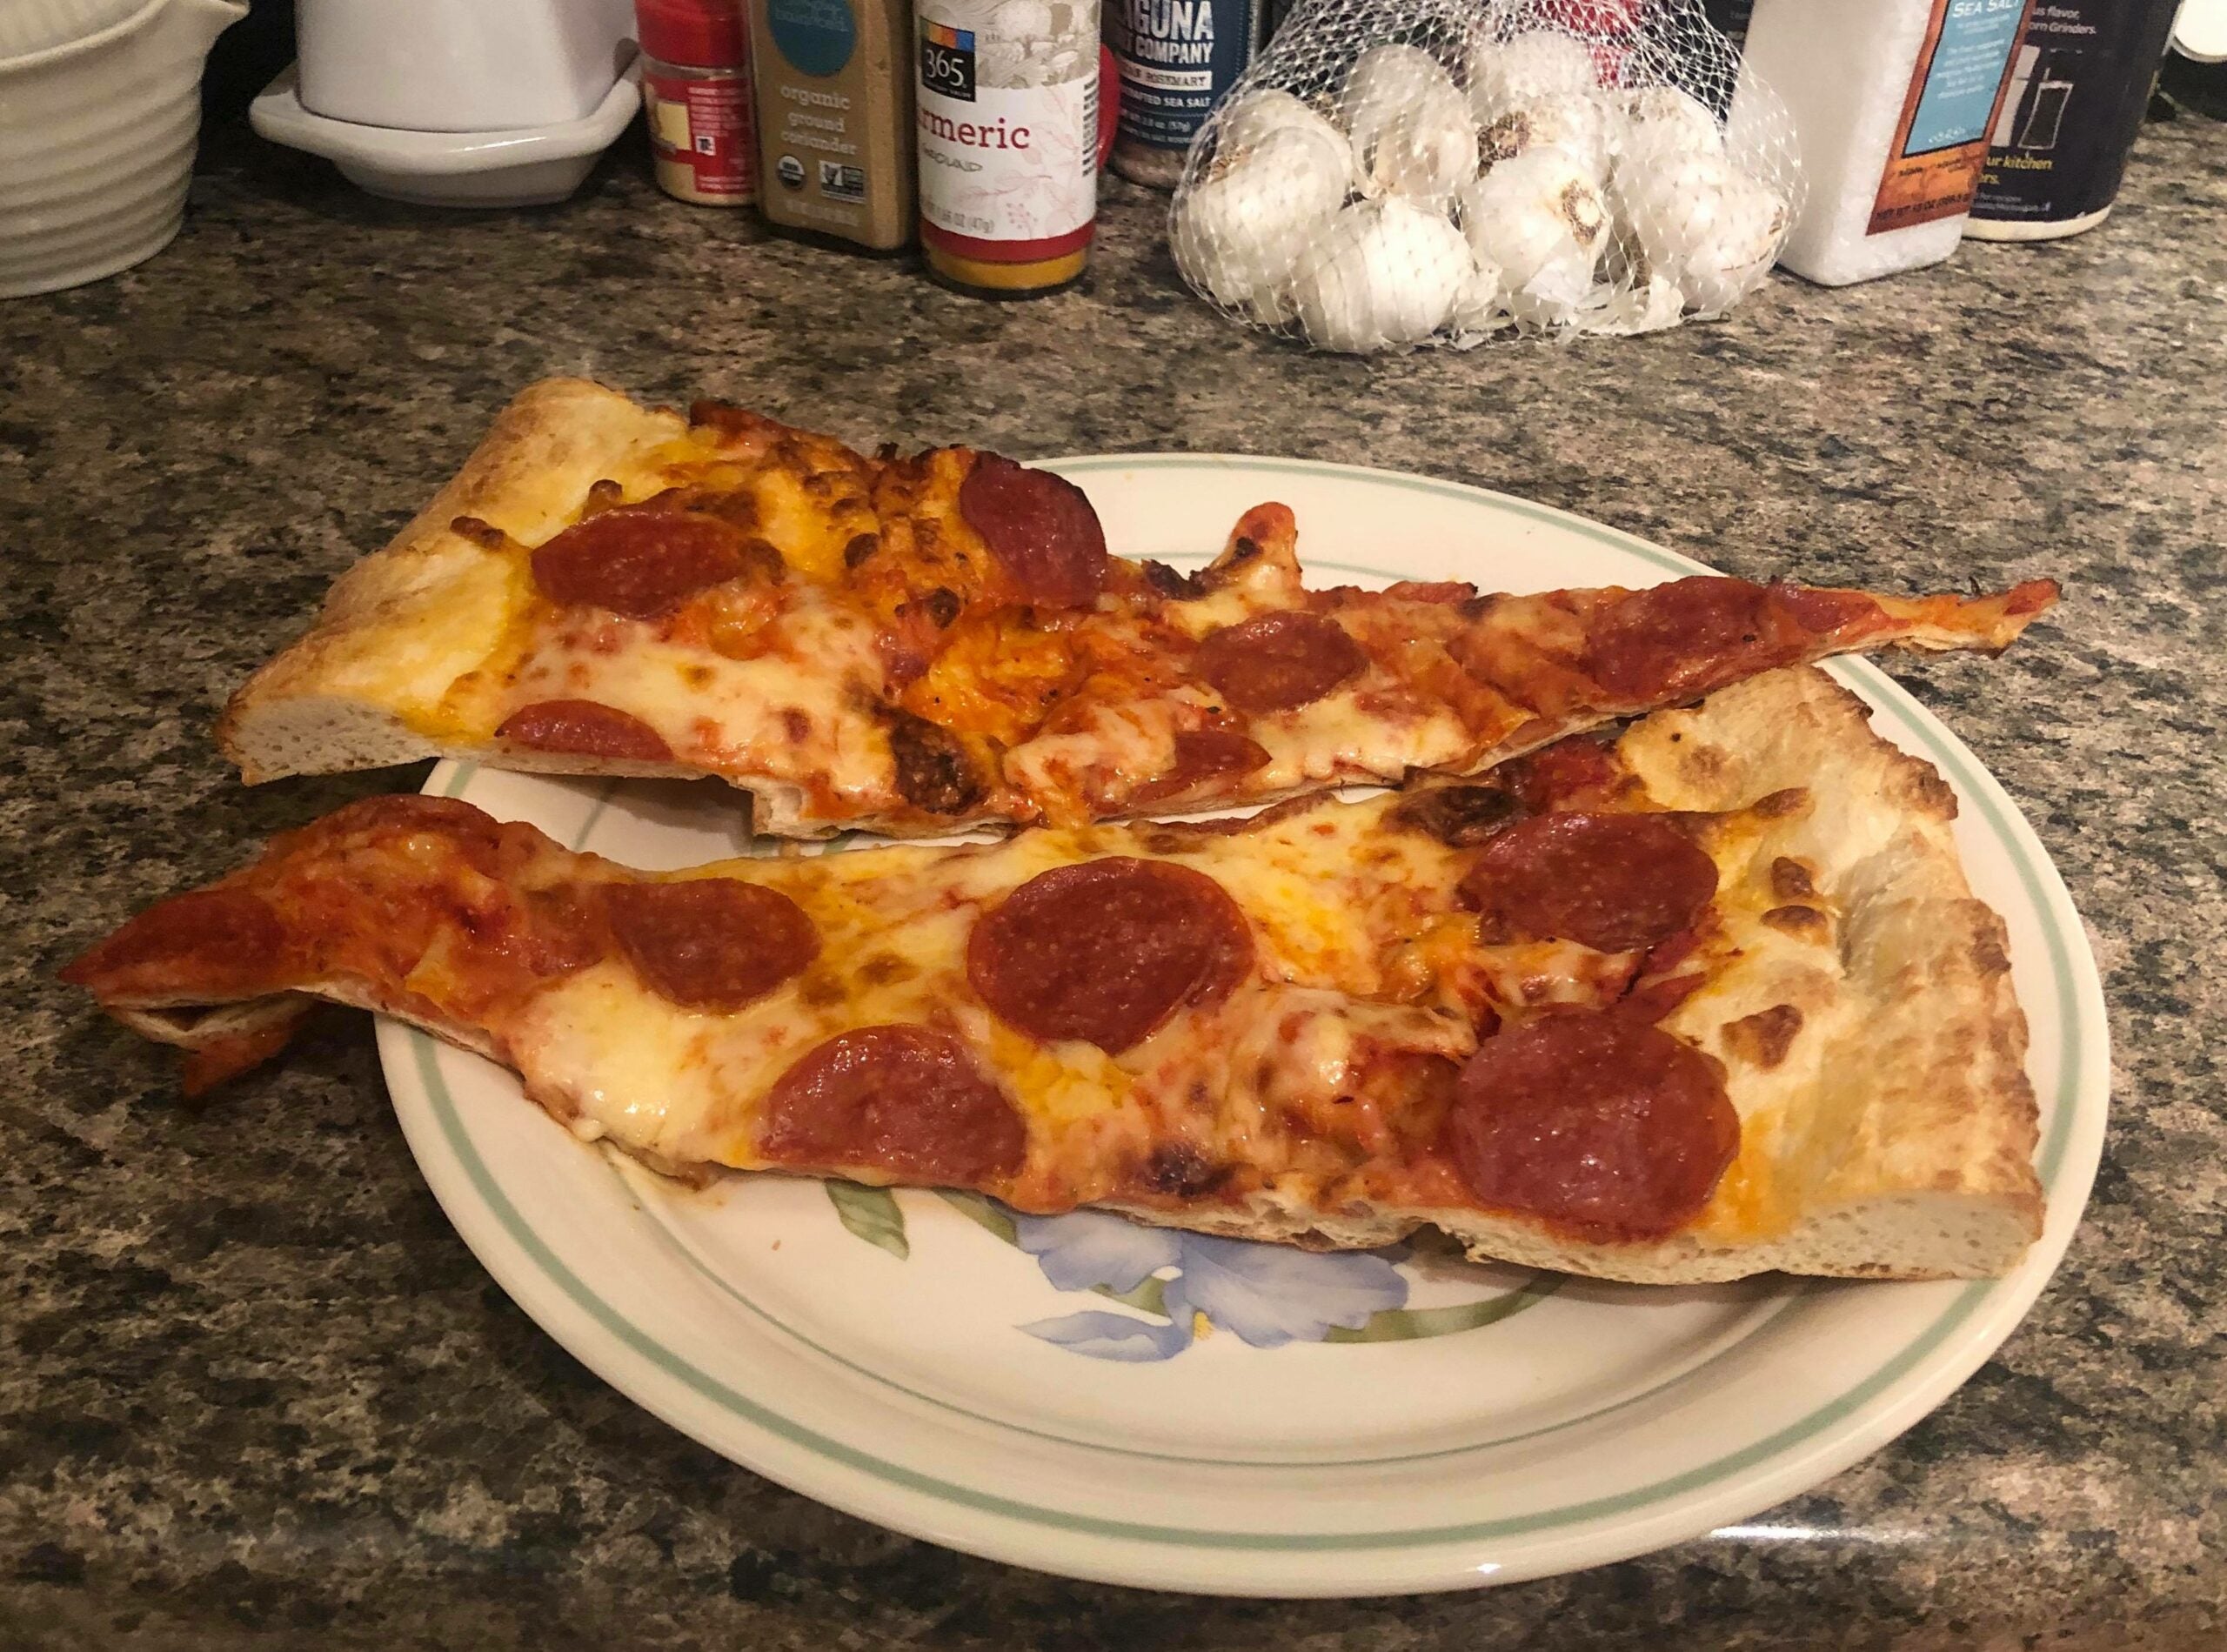 Two slices of pepperoni pizza on a plate after being rebaked as a way to determine the best way to reheat pizza.